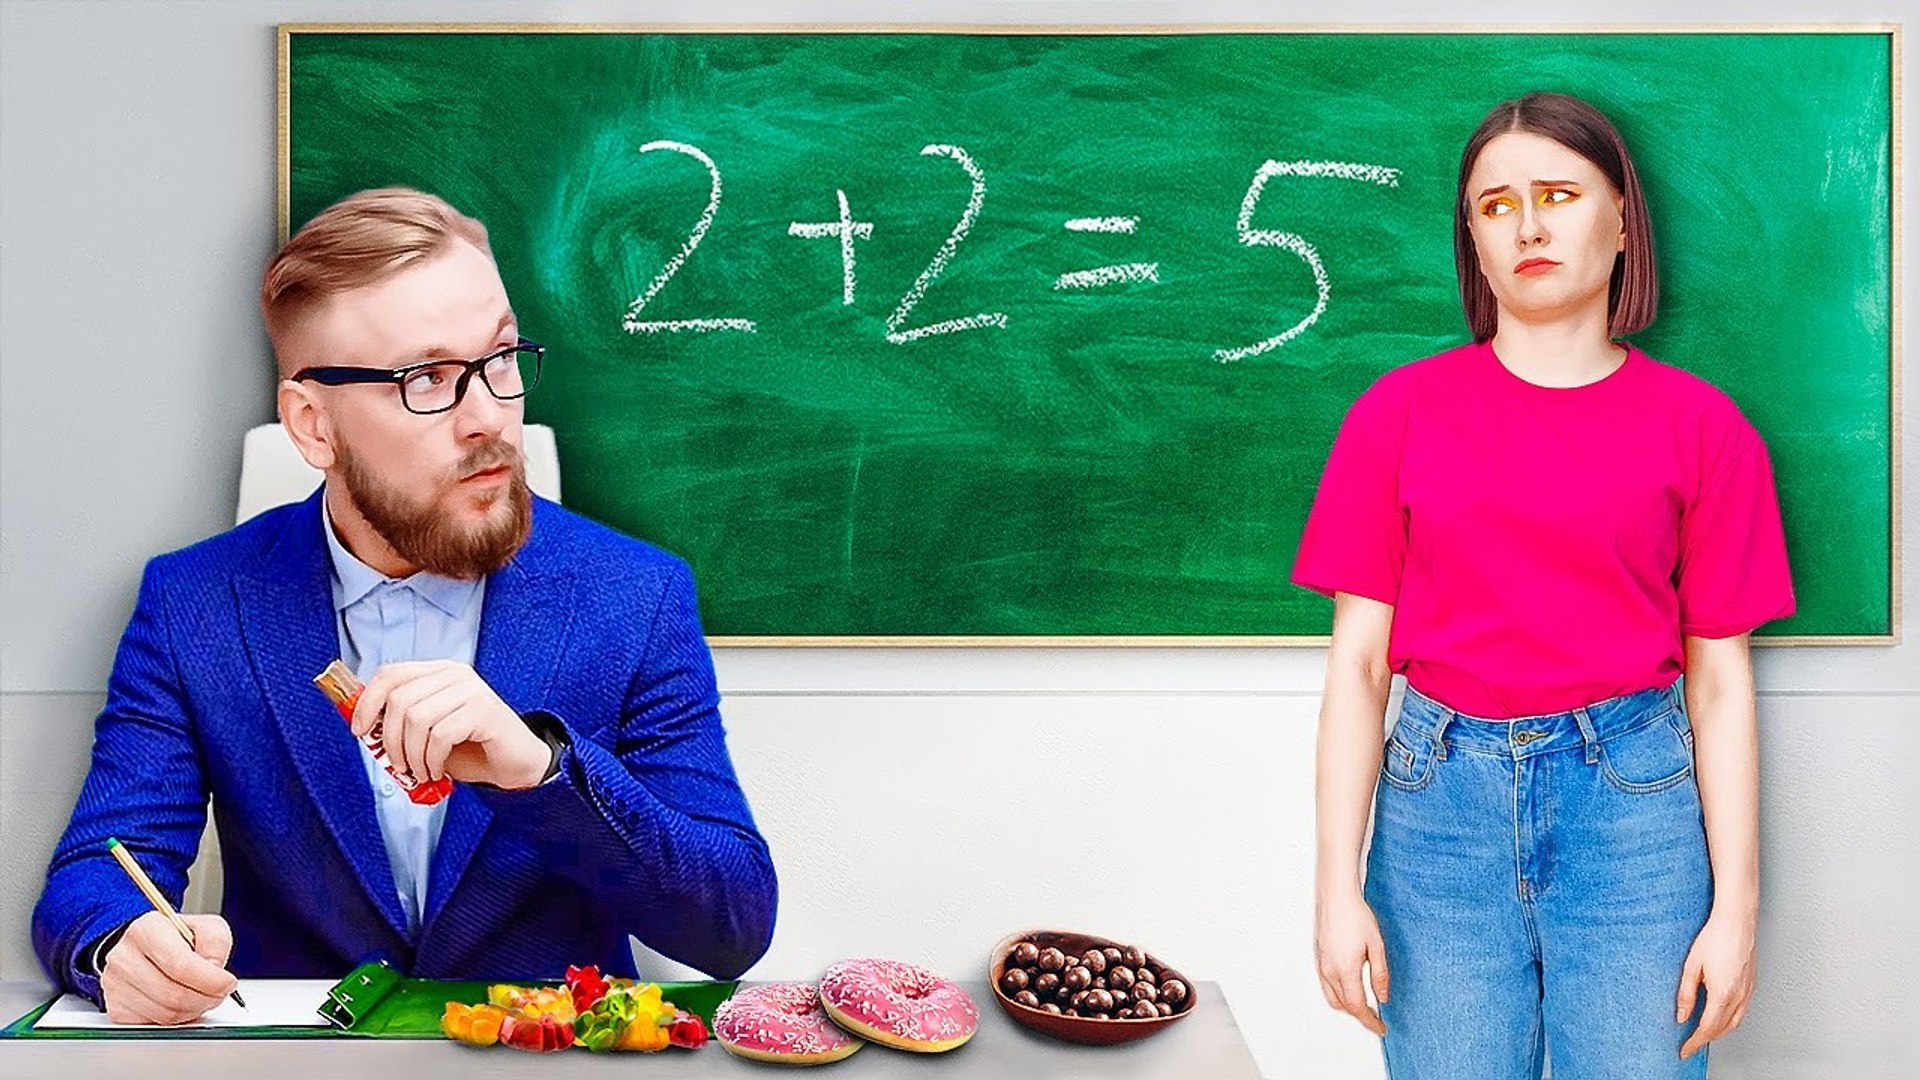 SCHOOL SMART HACKS AND MATH CHEATS Ideas To Trick Your Teacher by 123 GO Like!